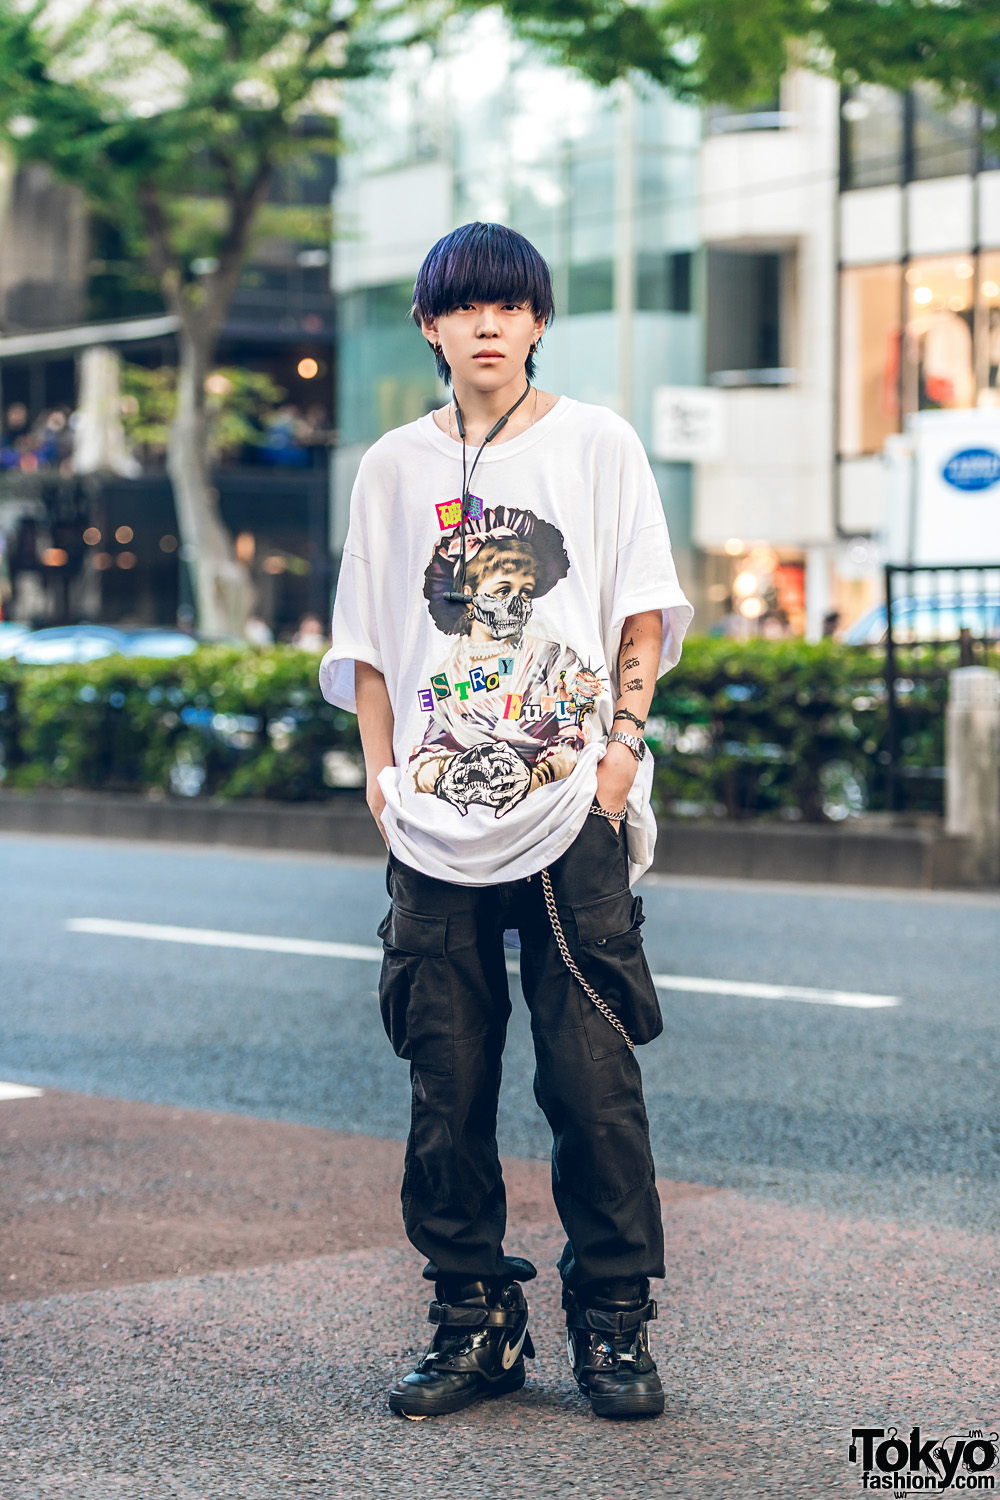 Harajuku Guy in Punk Inspired Streetwear w/ Comme des Garcons, Supreme, Nike & Chrome Hearts